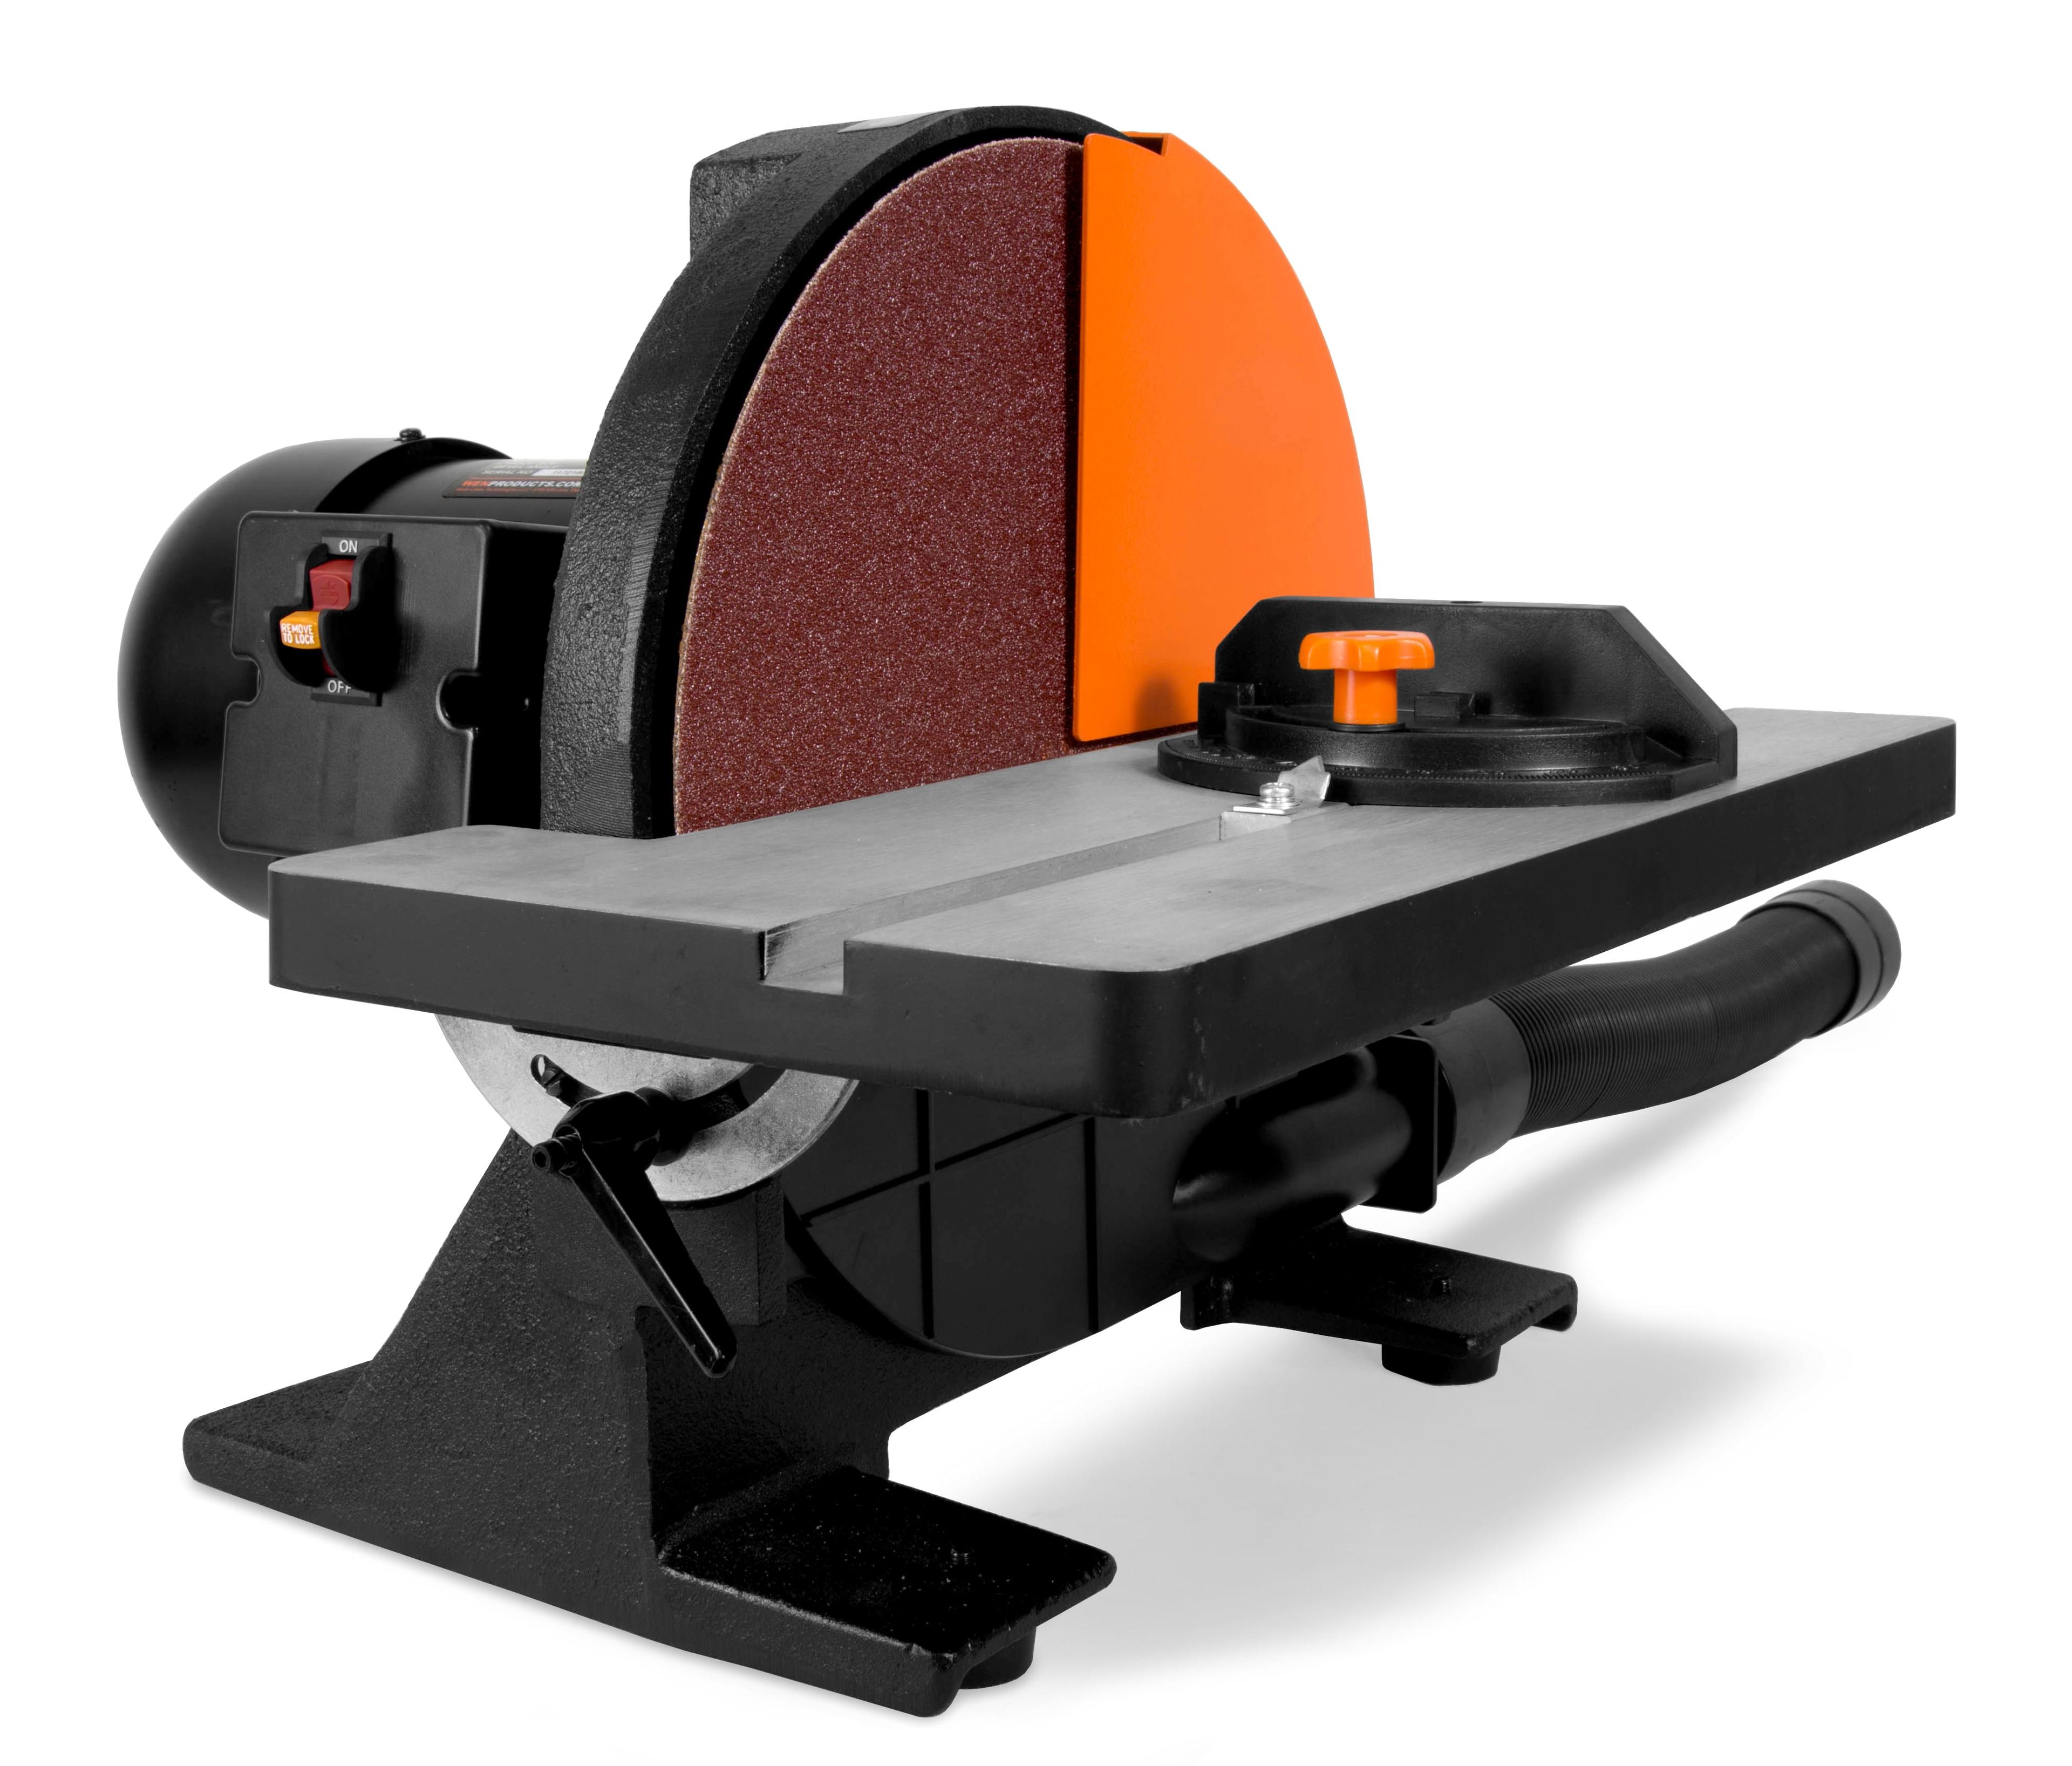 Powerful 12-Inch Benchtop Disc Sander with 45-Degree Bevel and Dust Collector